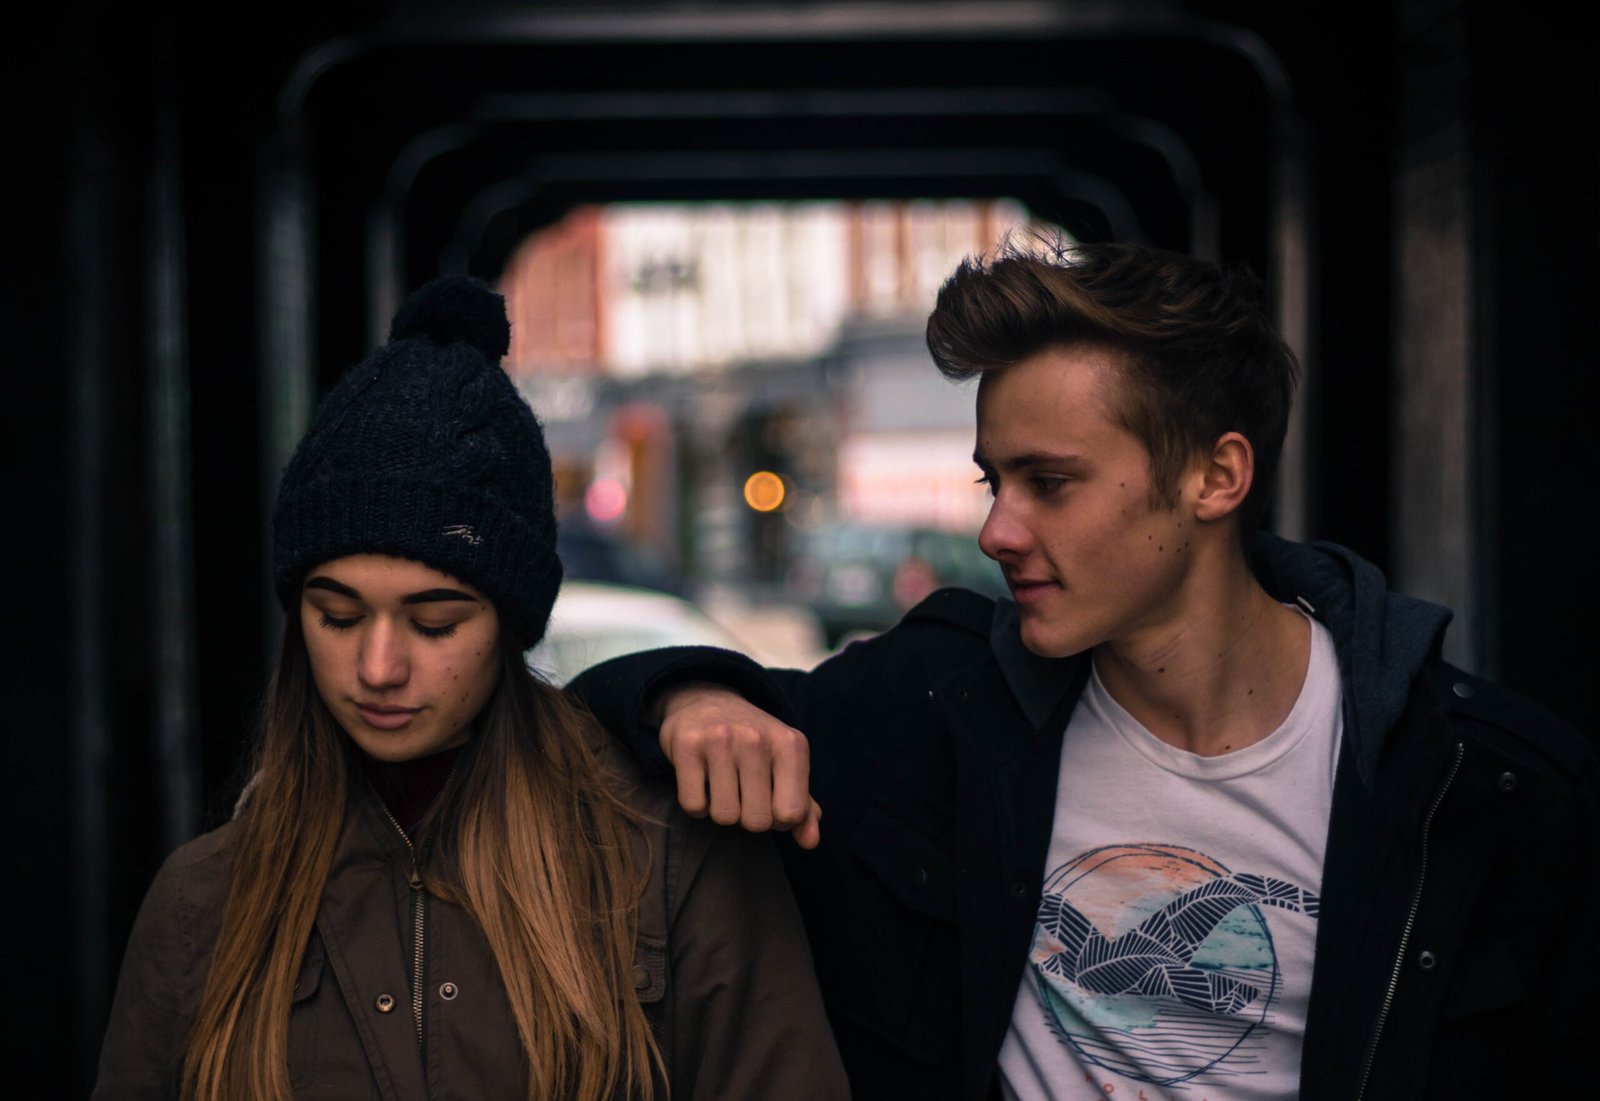 7 Behaviors You Should Never Accept In Your Relationship